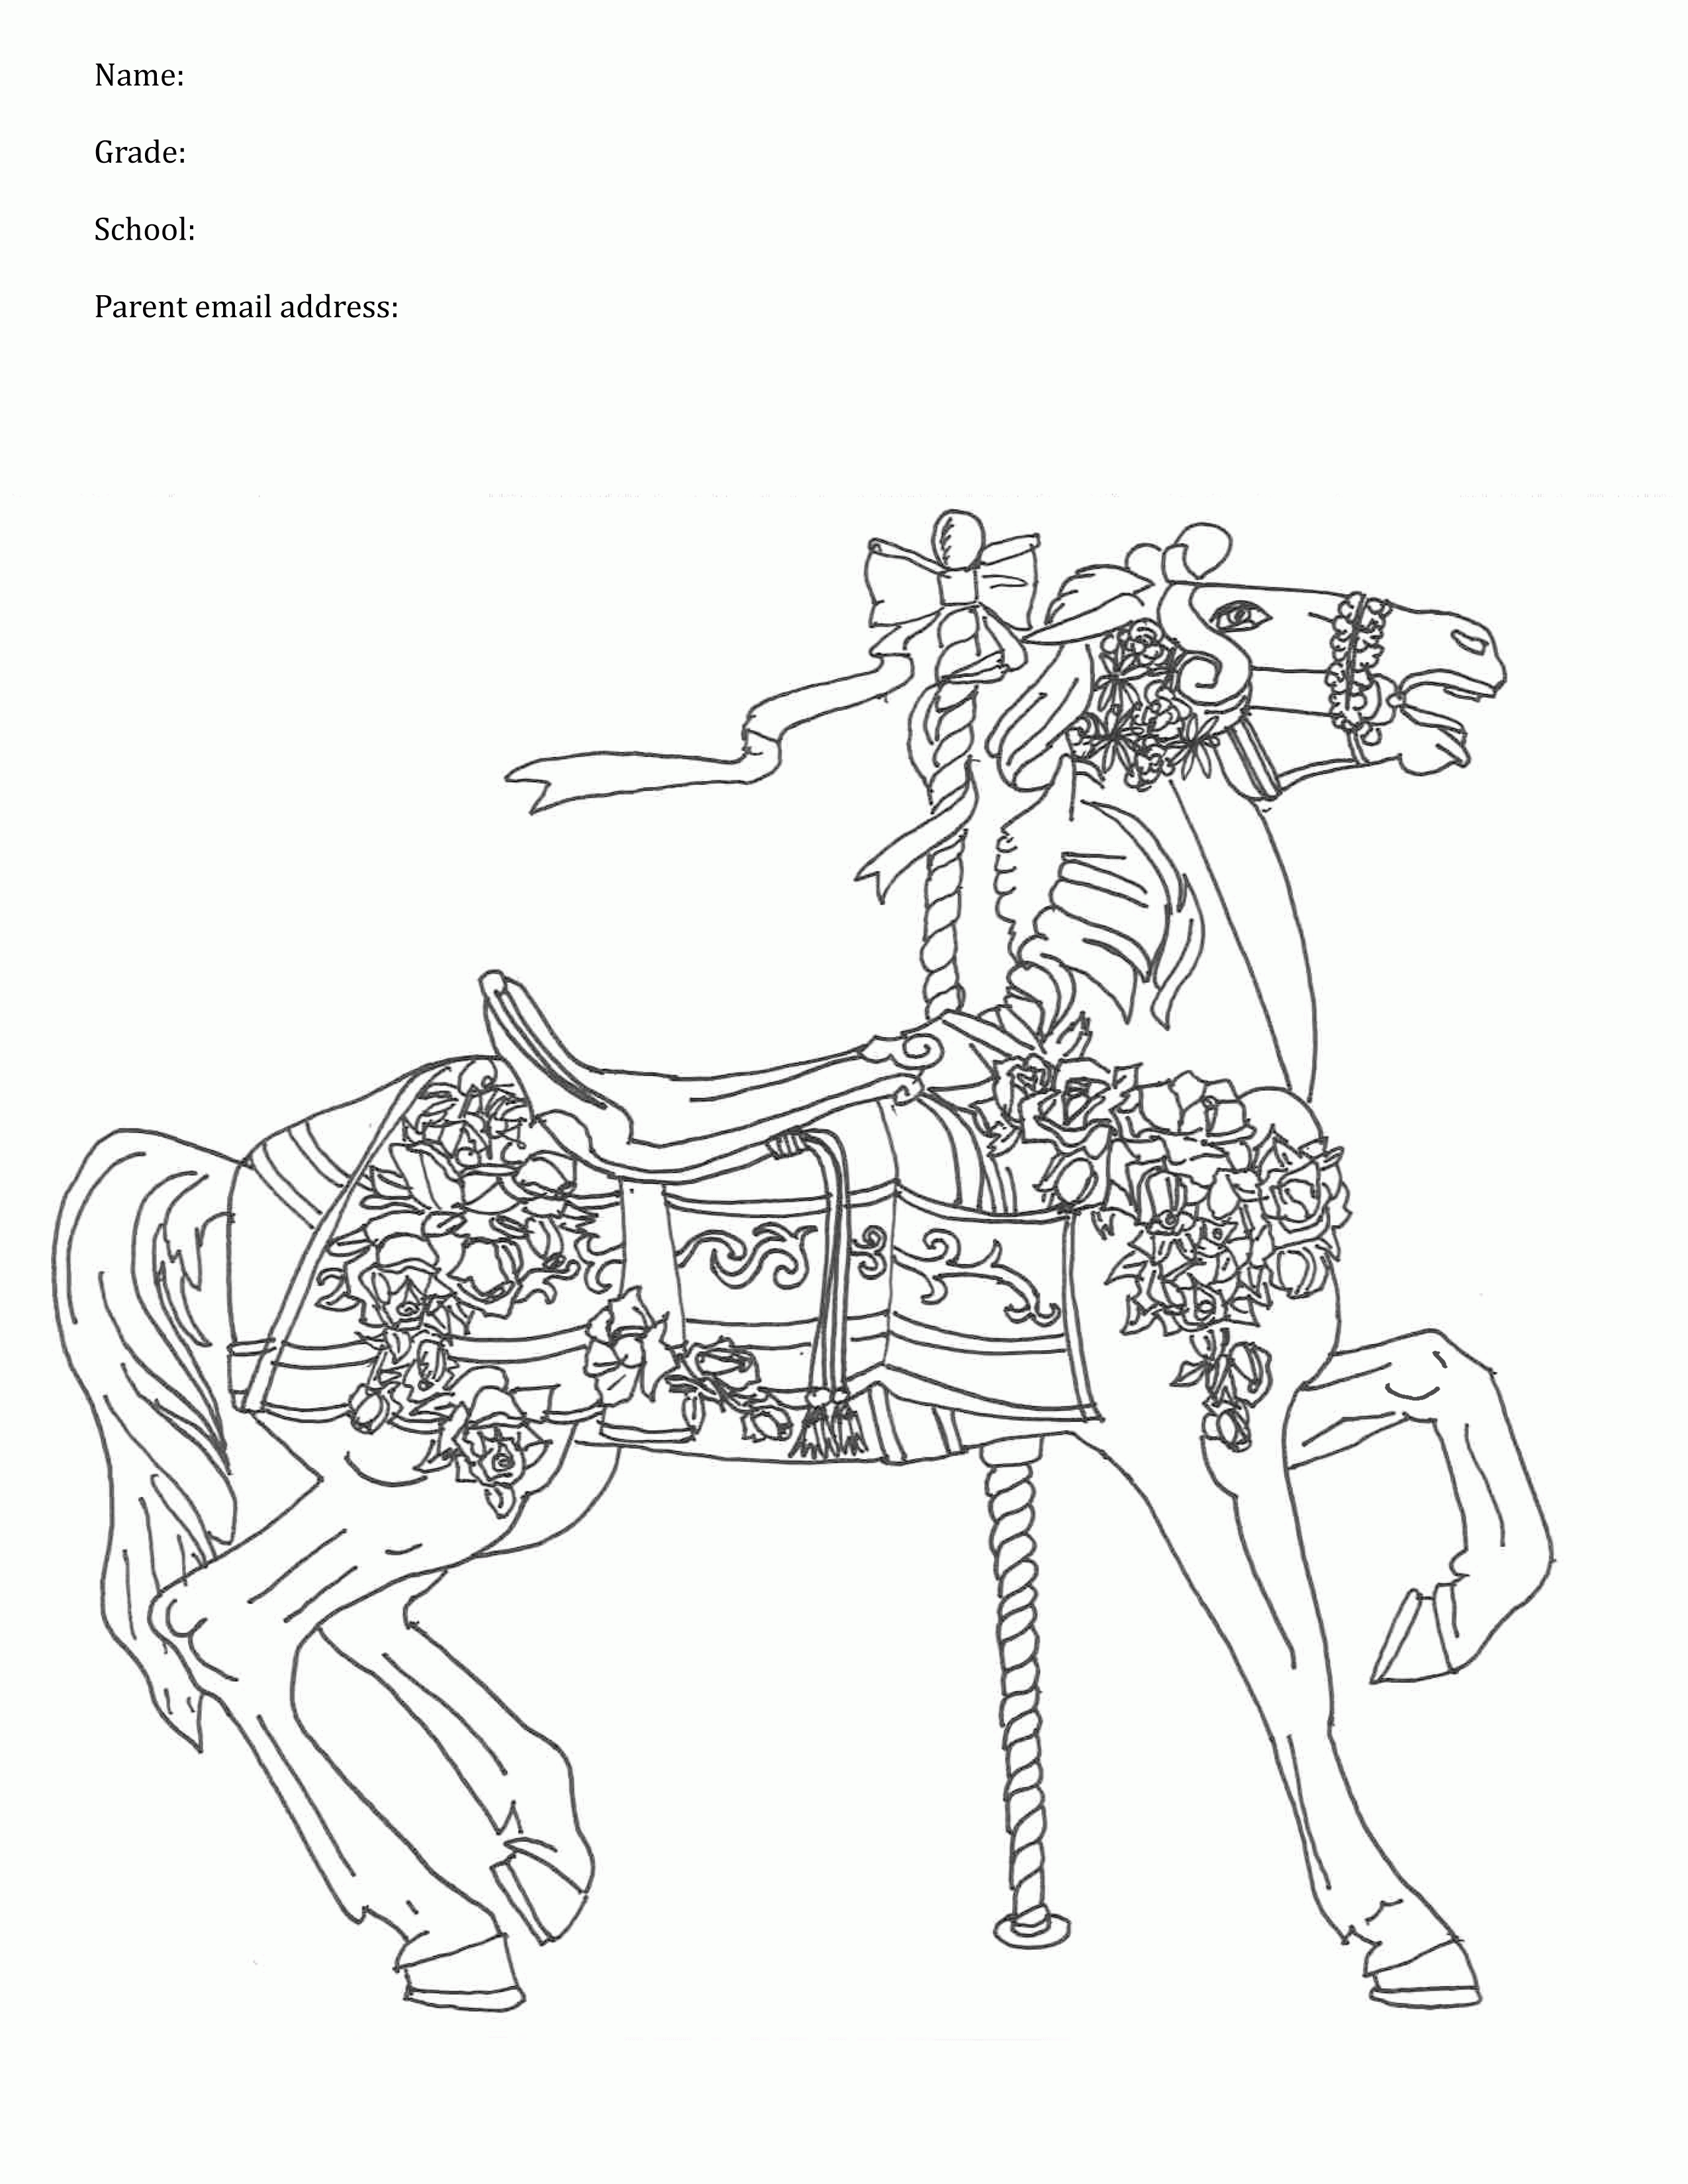 Carousel Horses Coloring Pages - Coloring Home